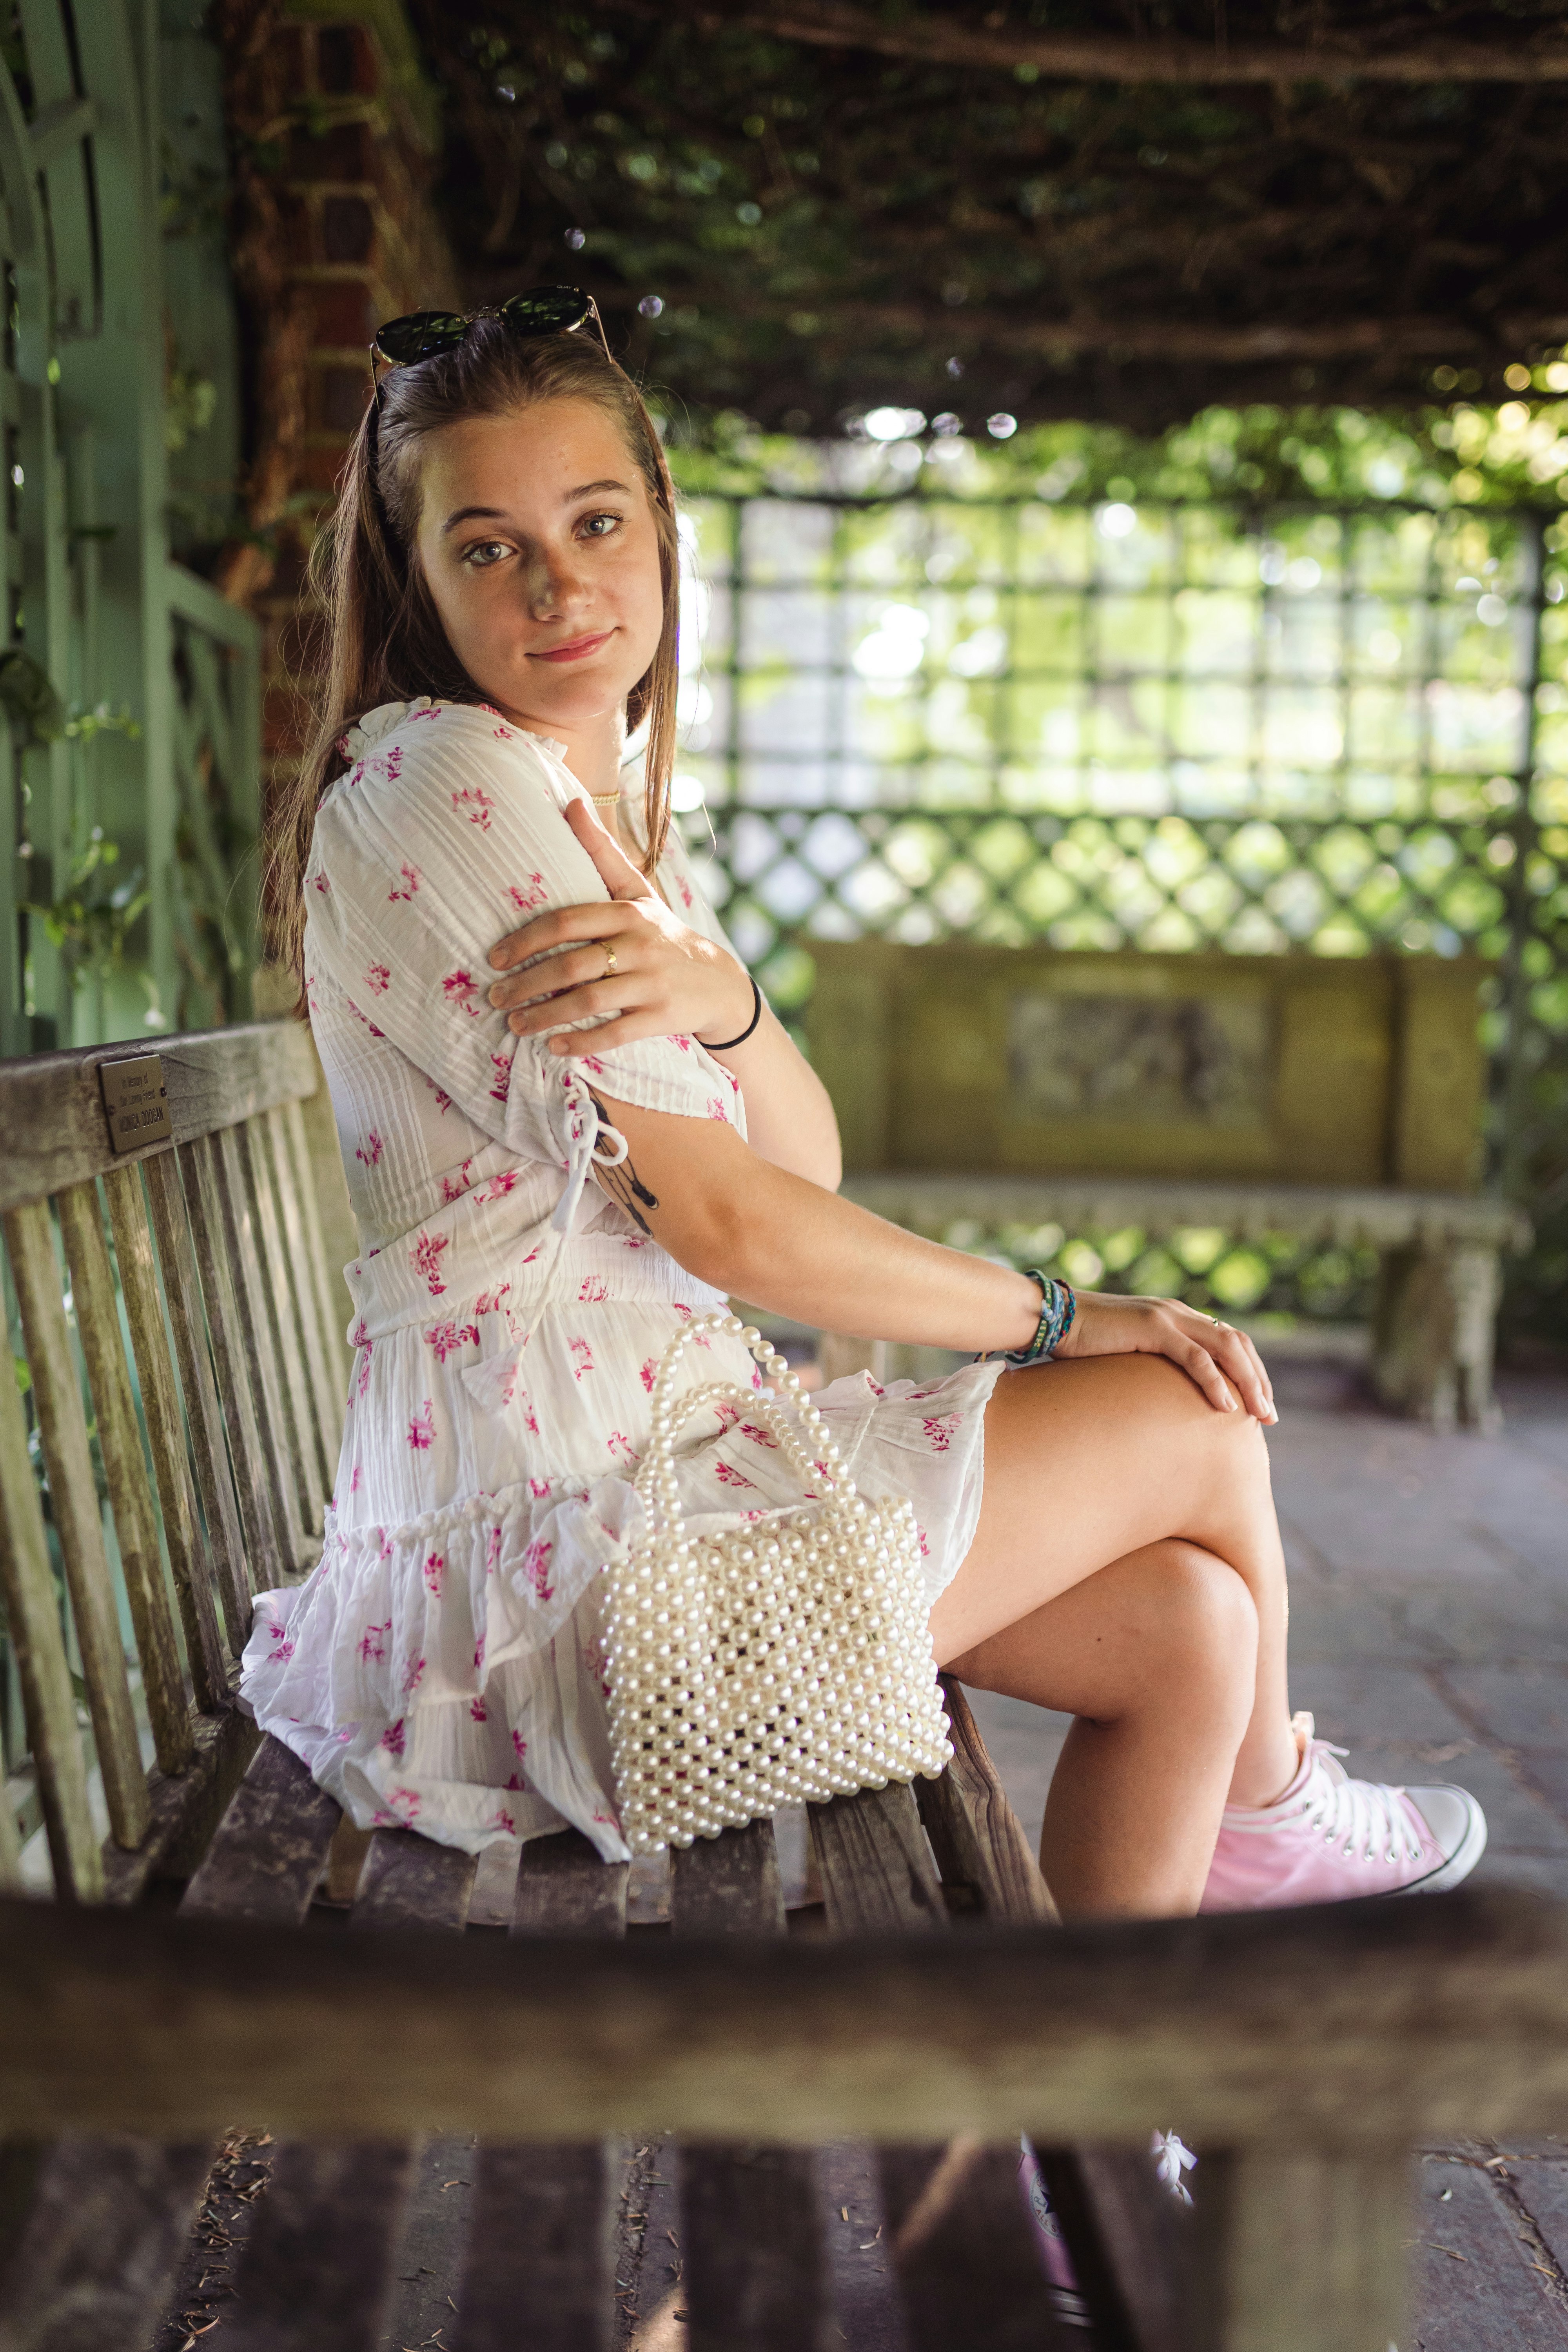 woman in white and pink polka dot dress sitting on brown wooden bench